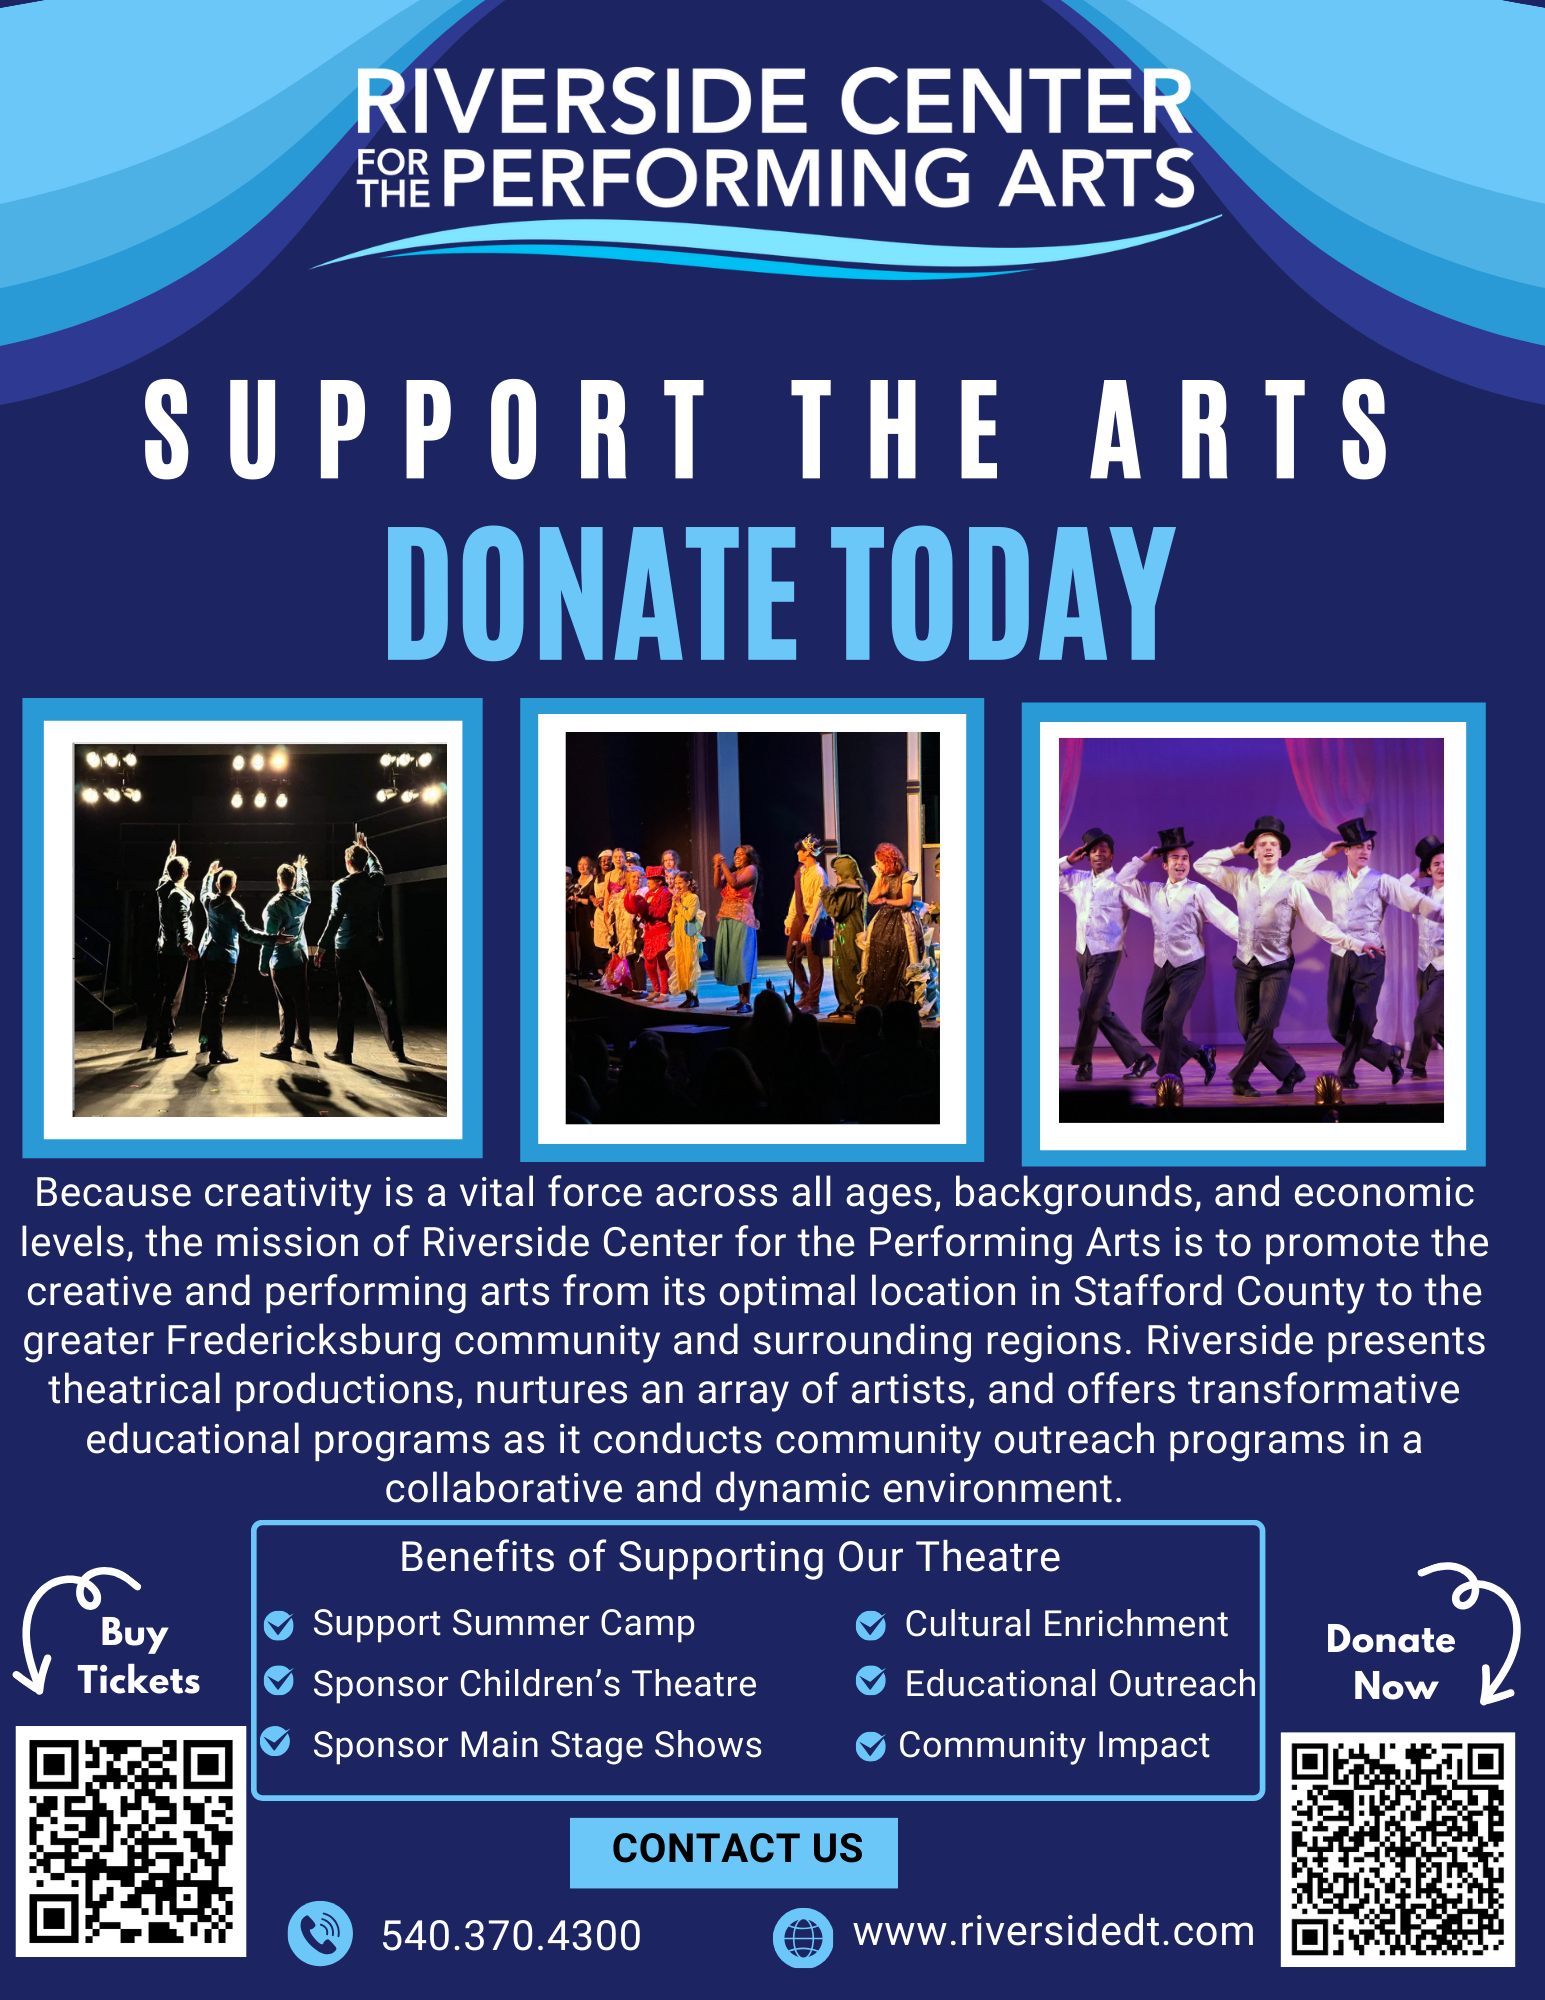 Support the Arts Fund